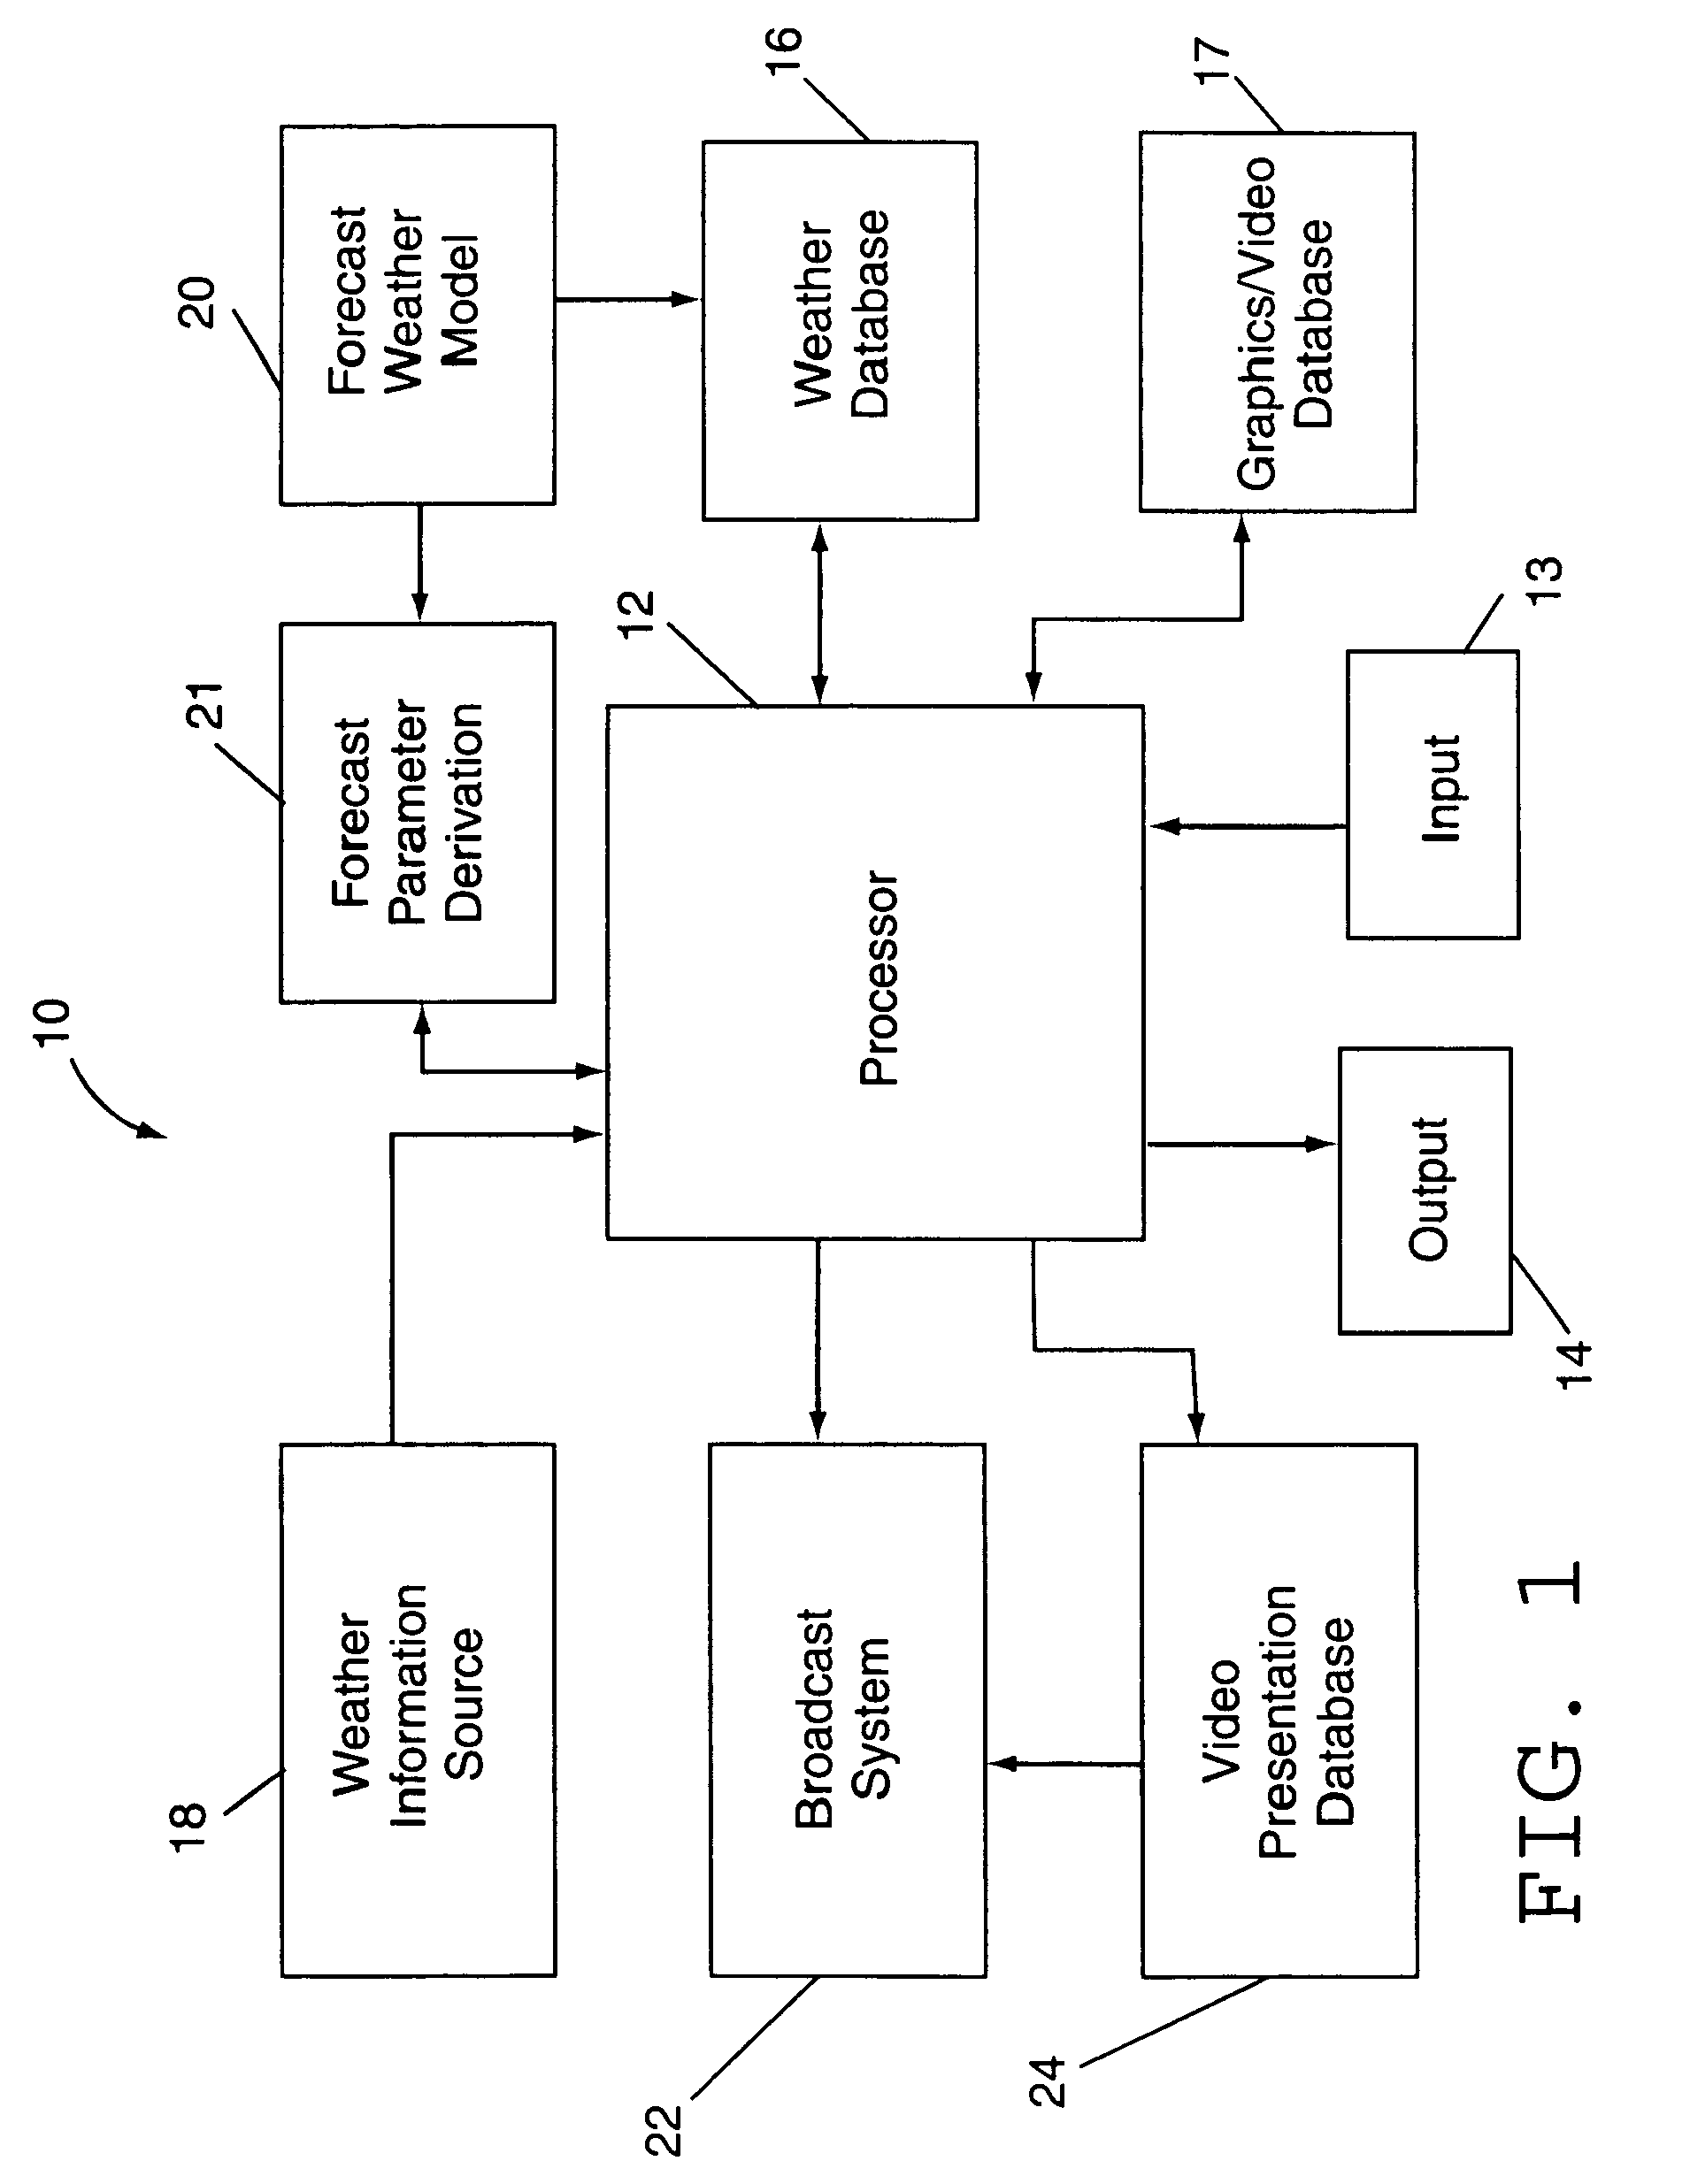 Forecast weather video presentation system and method